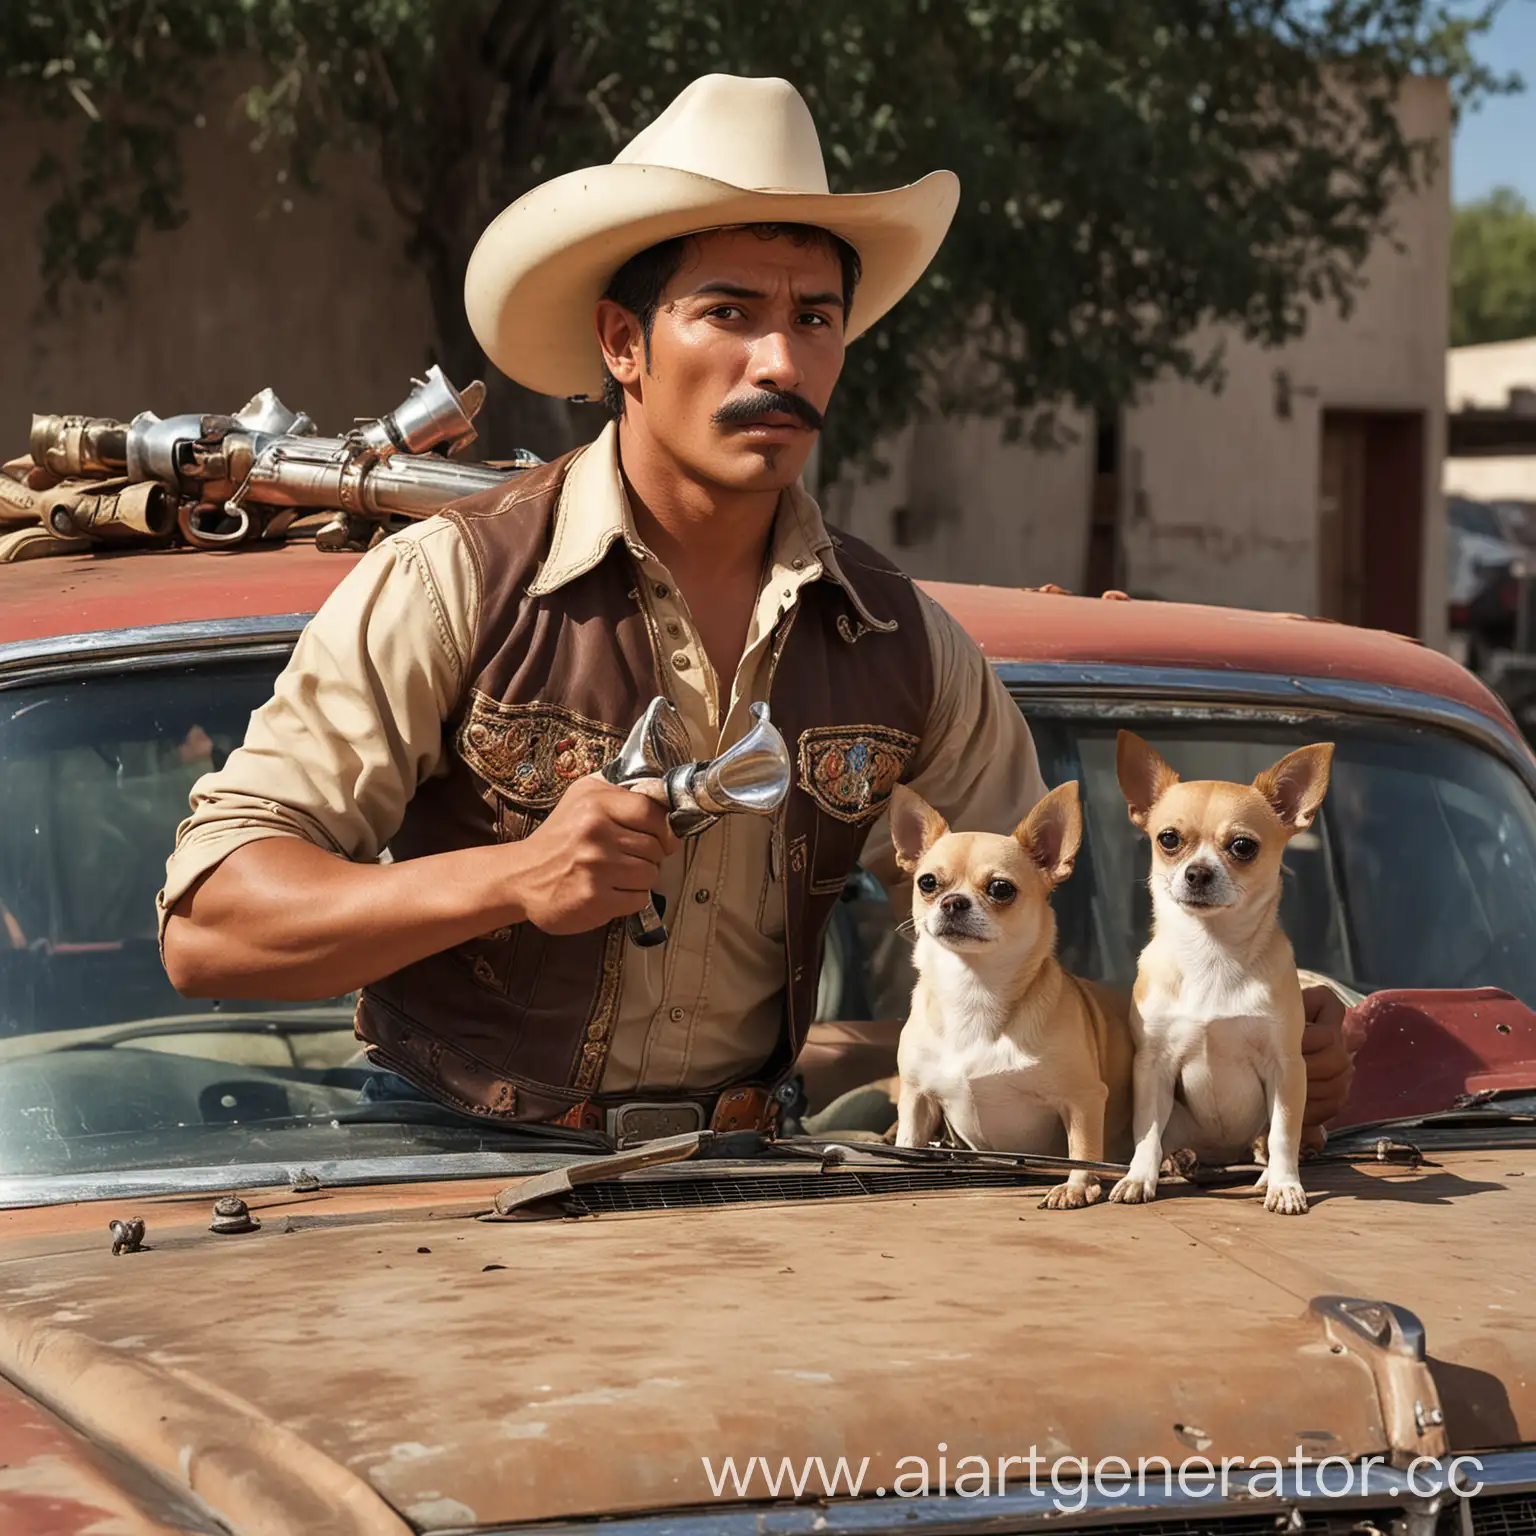 Hot-Mexican-Cowboy-with-Retro-Car-and-Large-Family